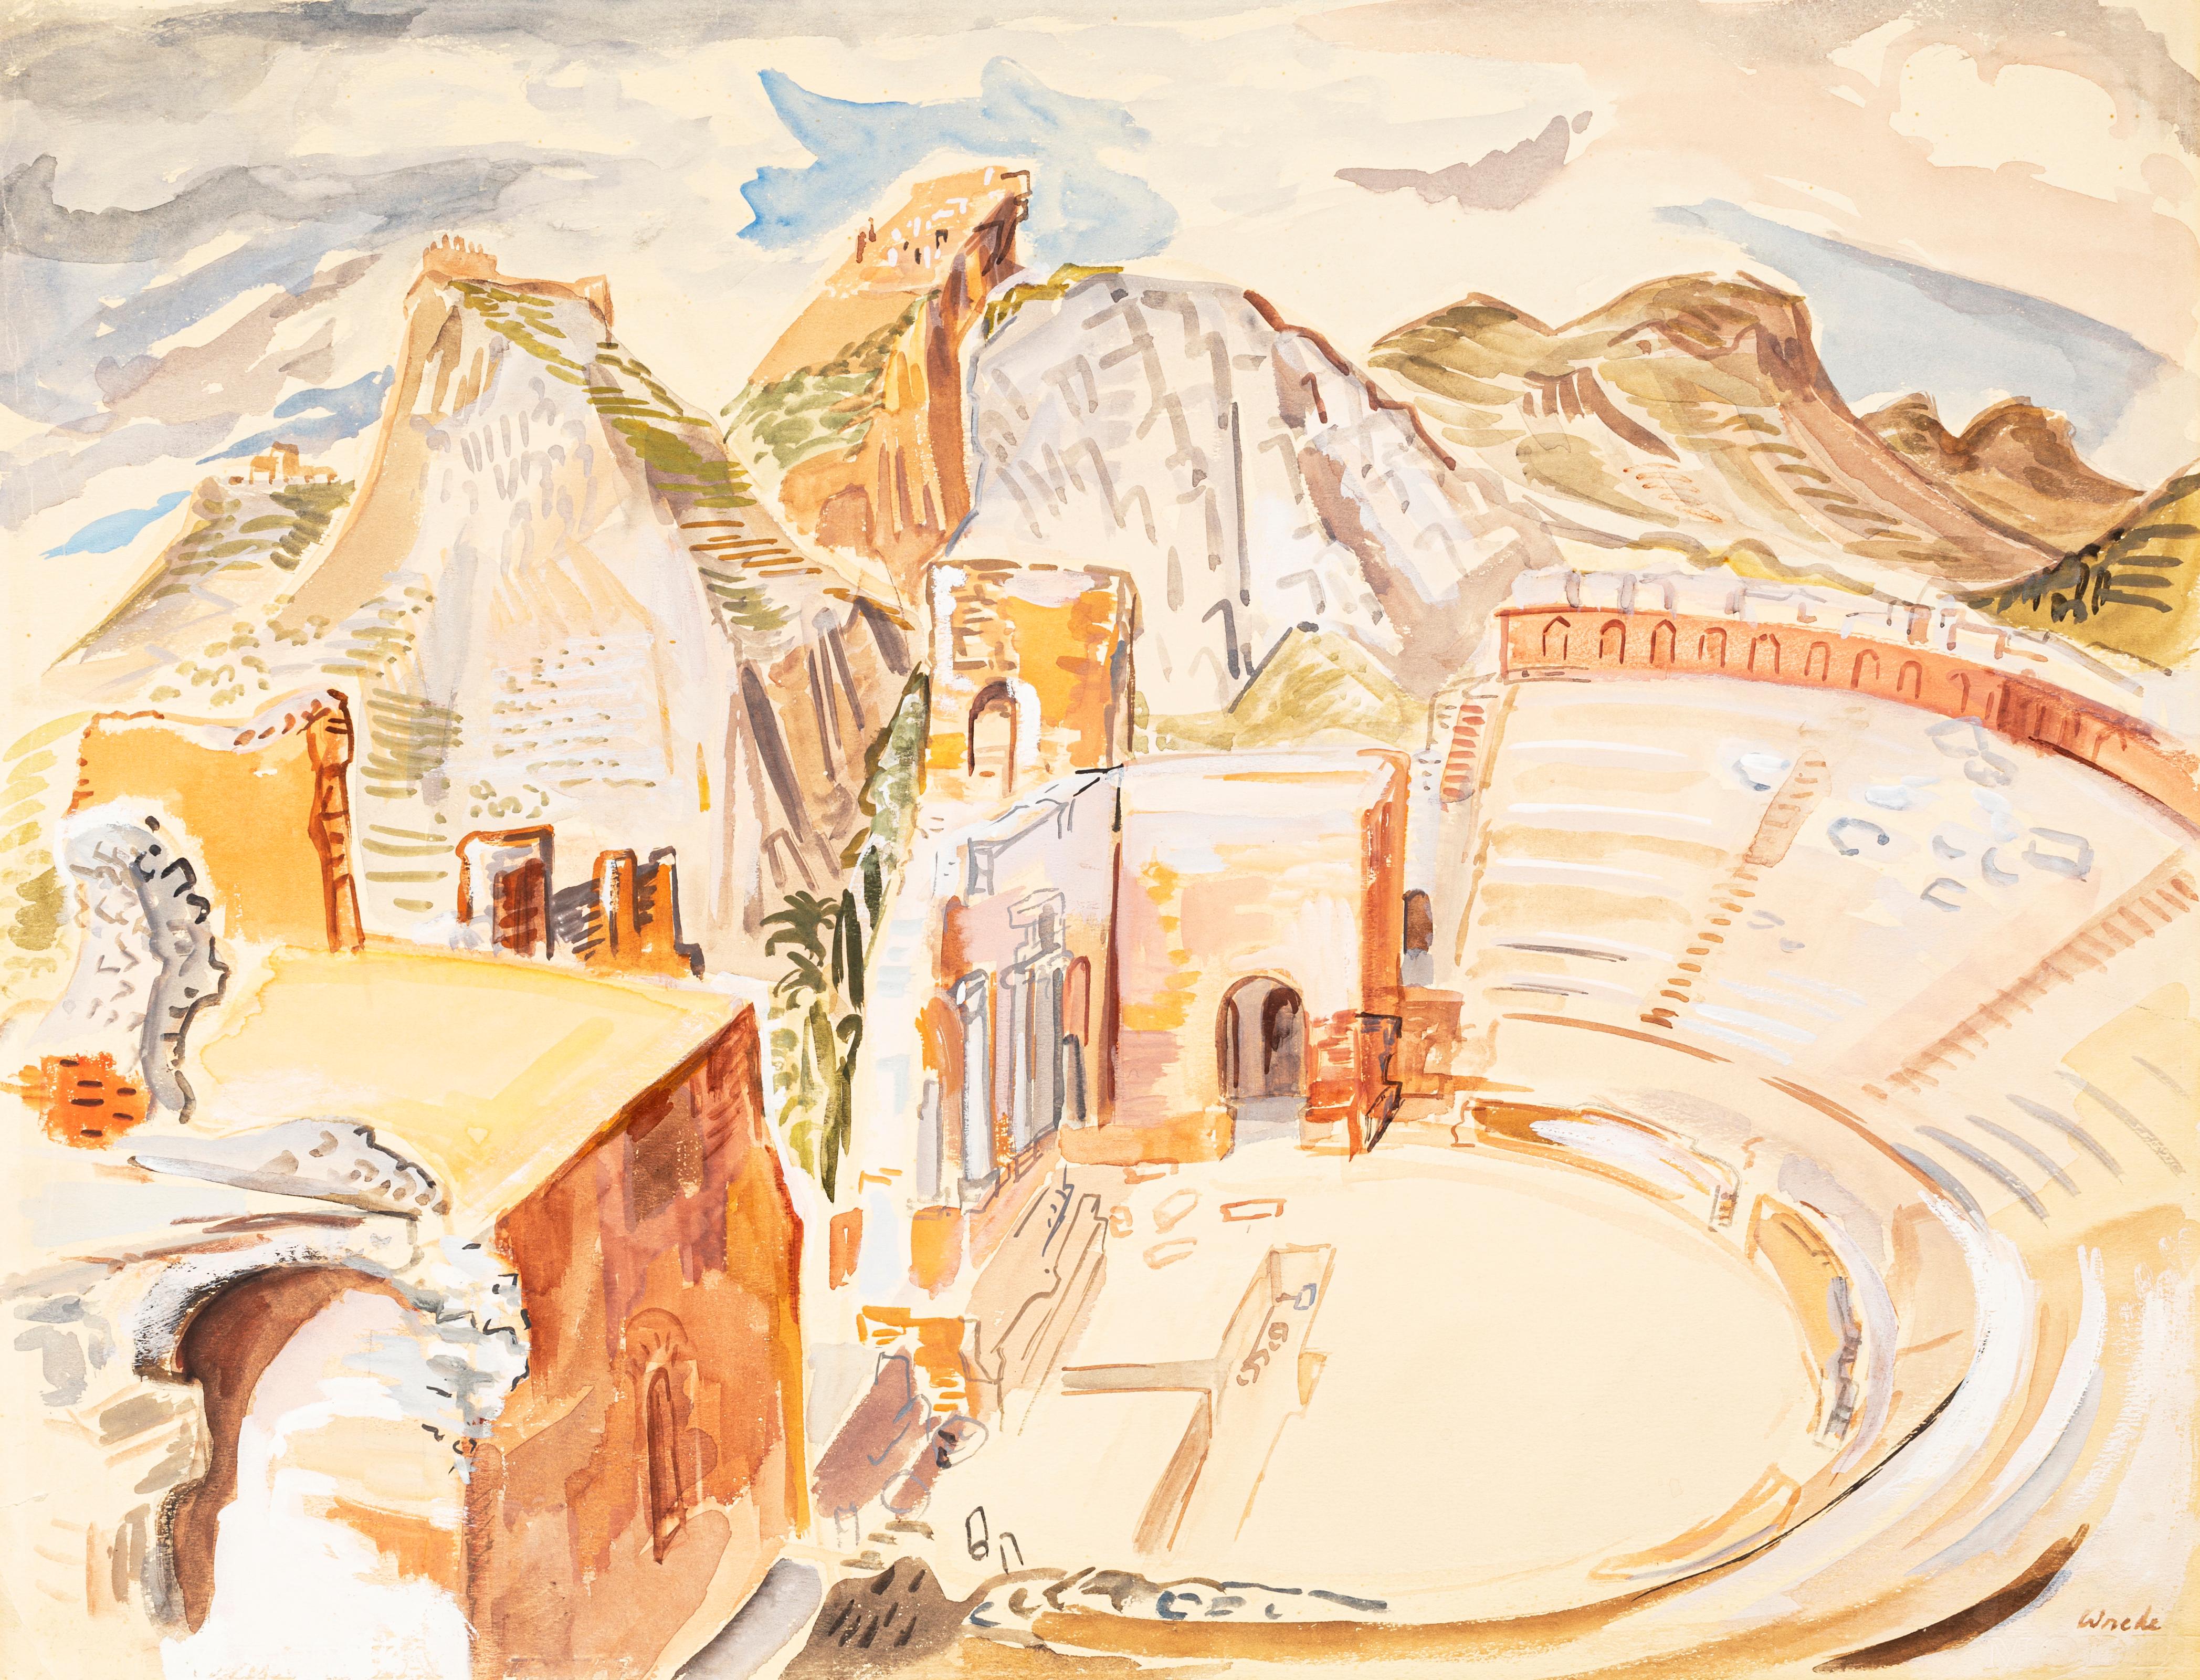 Maria Elisabeth Wrede Figurative Art - The Ancient Theater - Watercolor on Paper by M.E. Wrede - Mid 20th Century